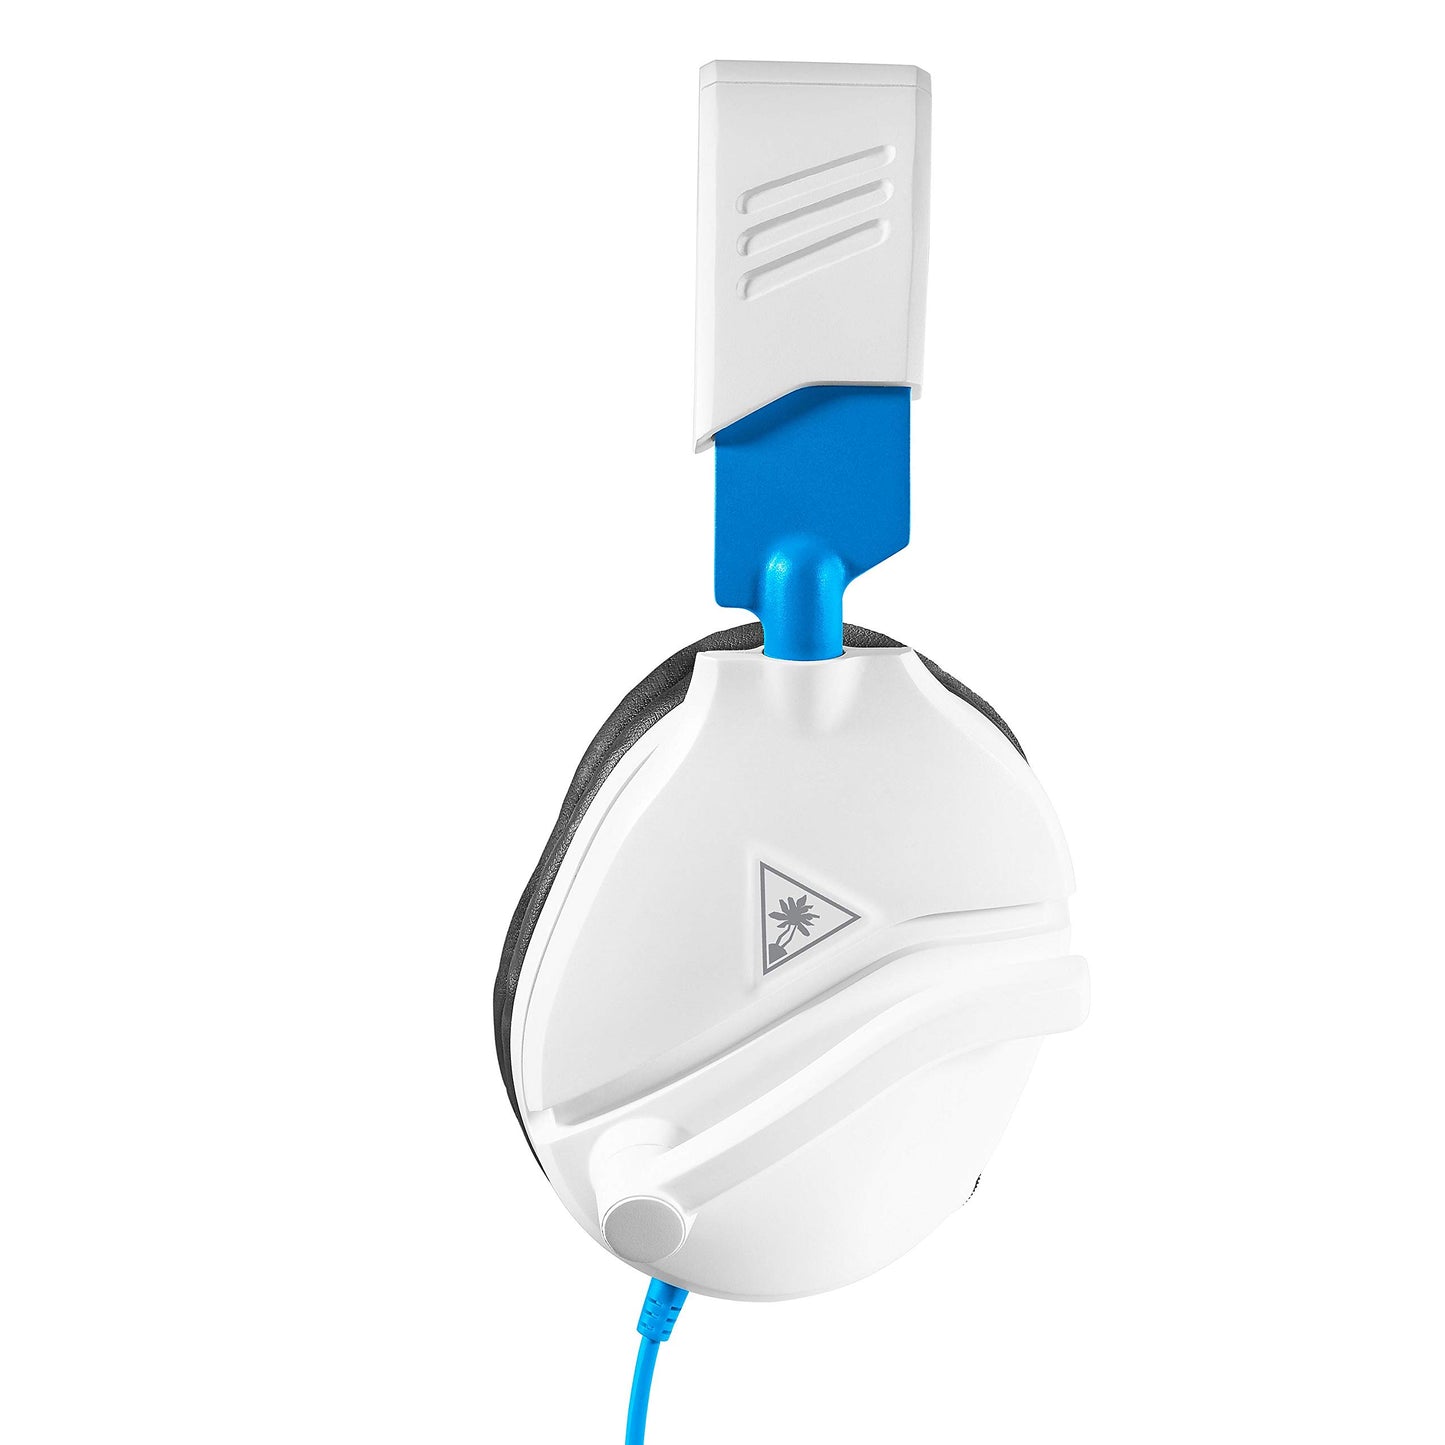 Turtle Beach Recon 70P White Gaming Headset for PS4, Xbox One, Nintendo Switch And PC